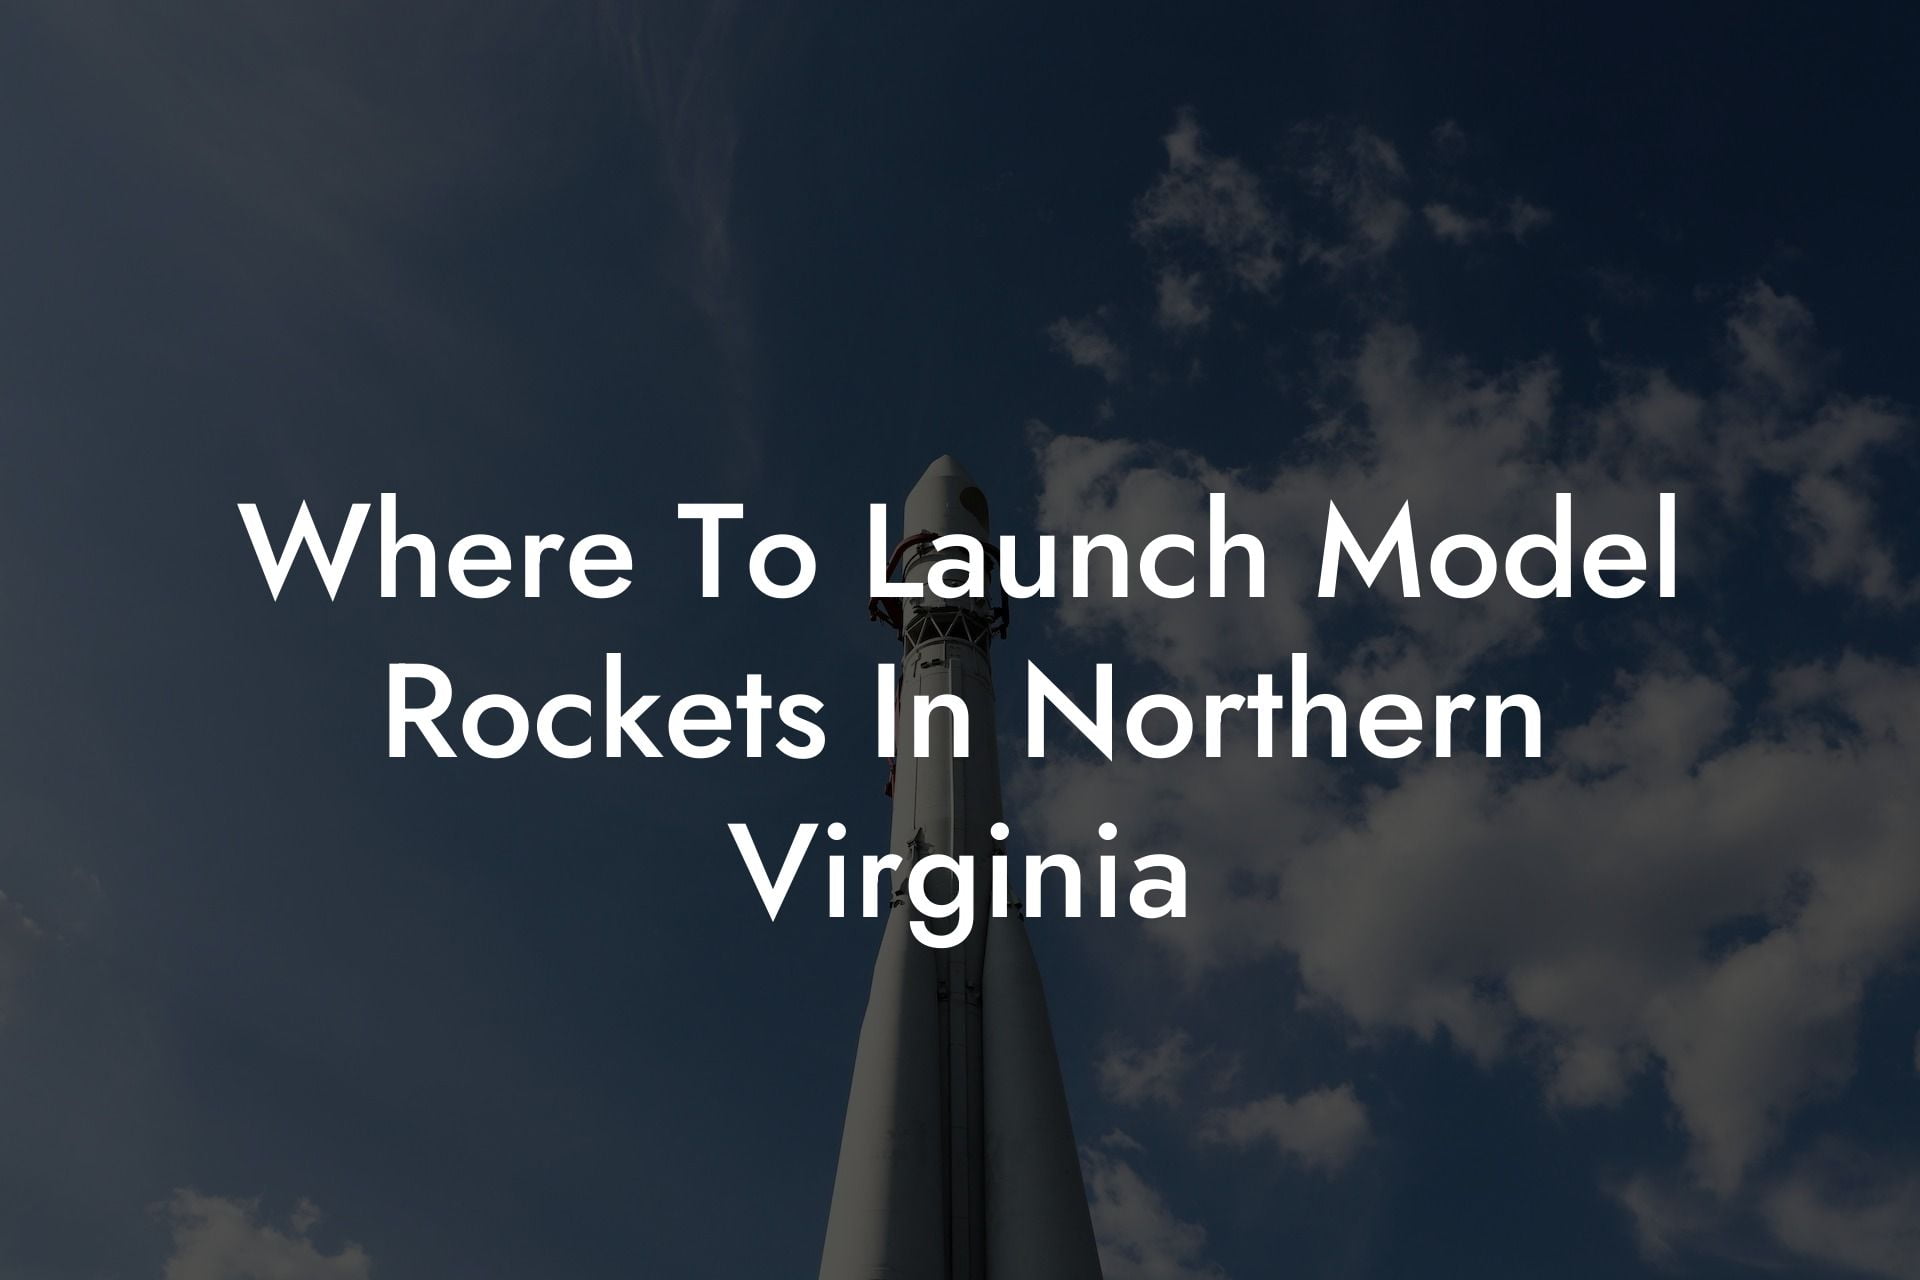 Where To Launch Model Rockets In Northern Virginia